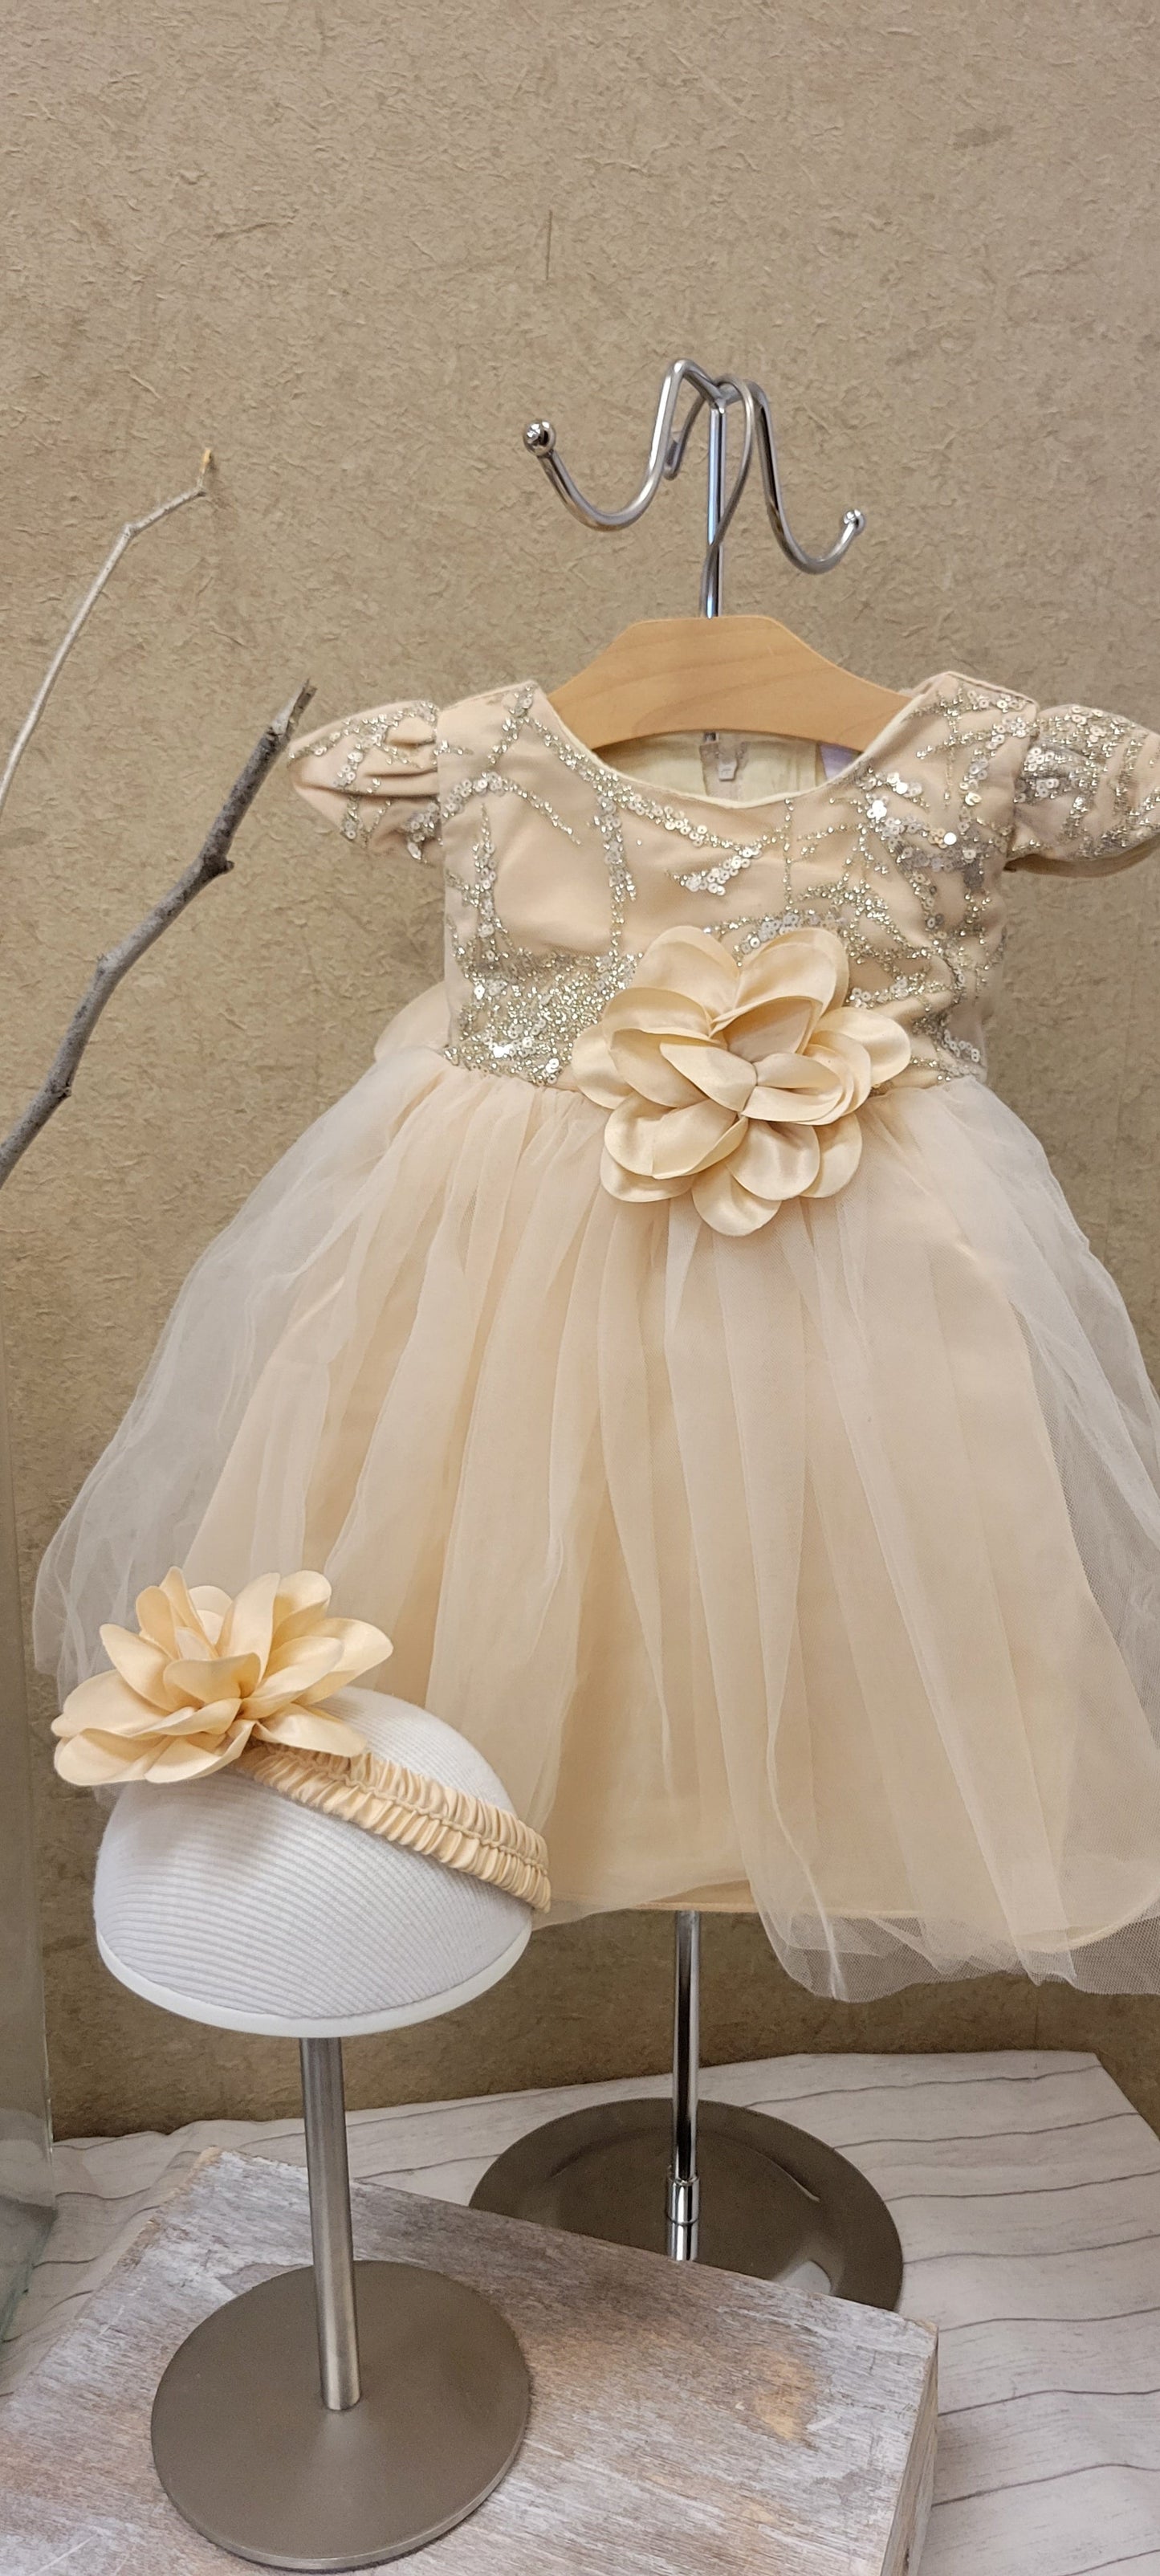 Gold and white Baby Dress